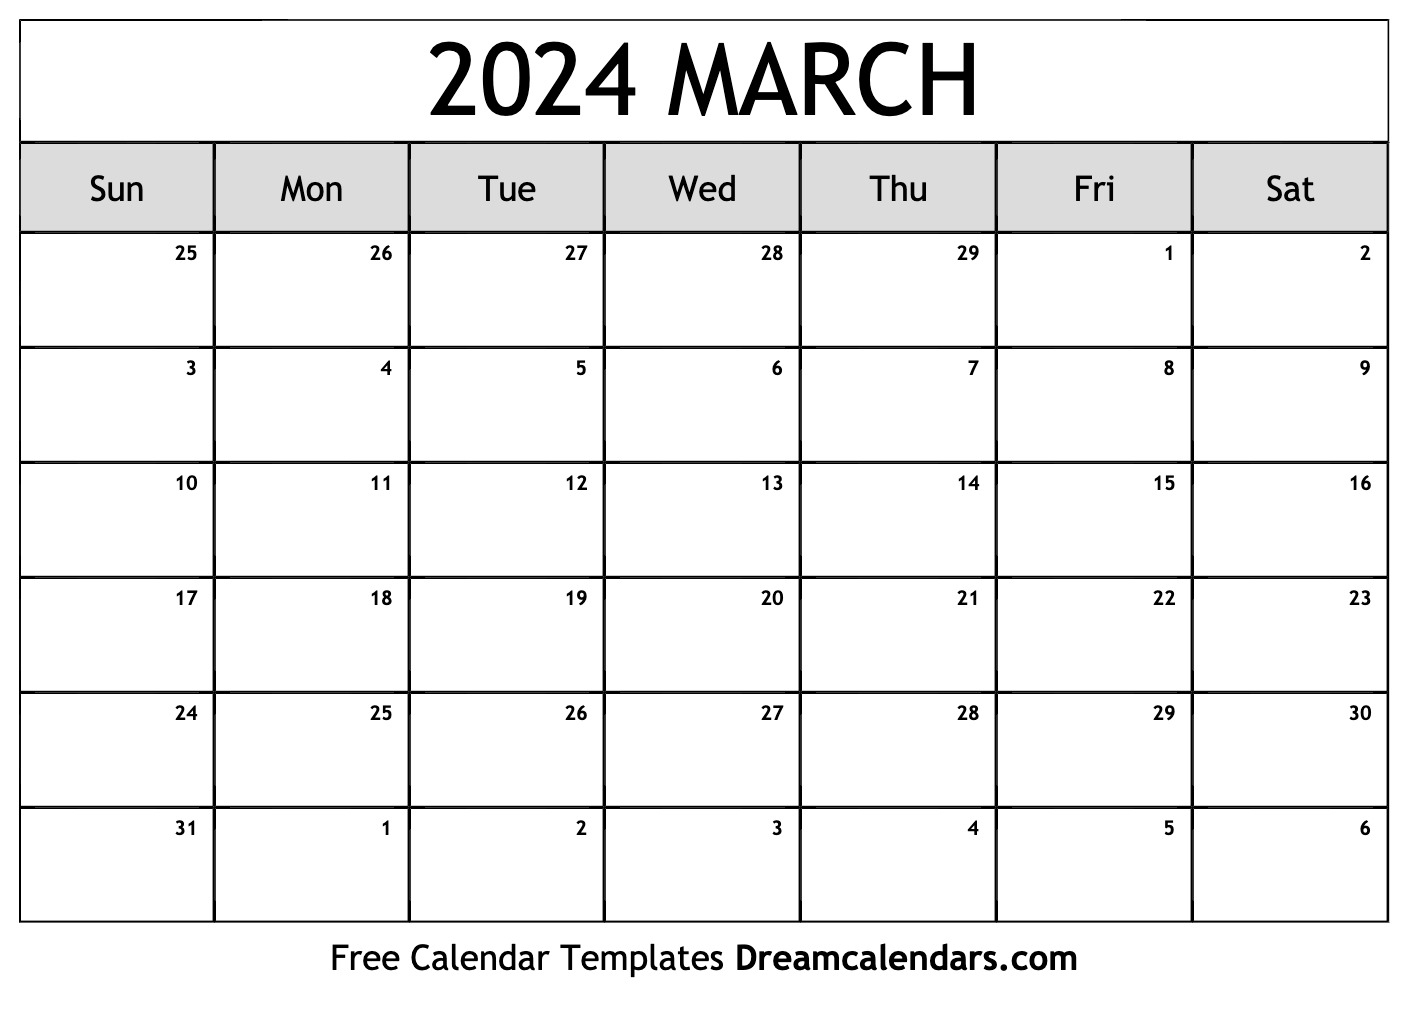 March 2024 Calendar | Free Blank Printable With Holidays for March 2024 Free Calendar Printable